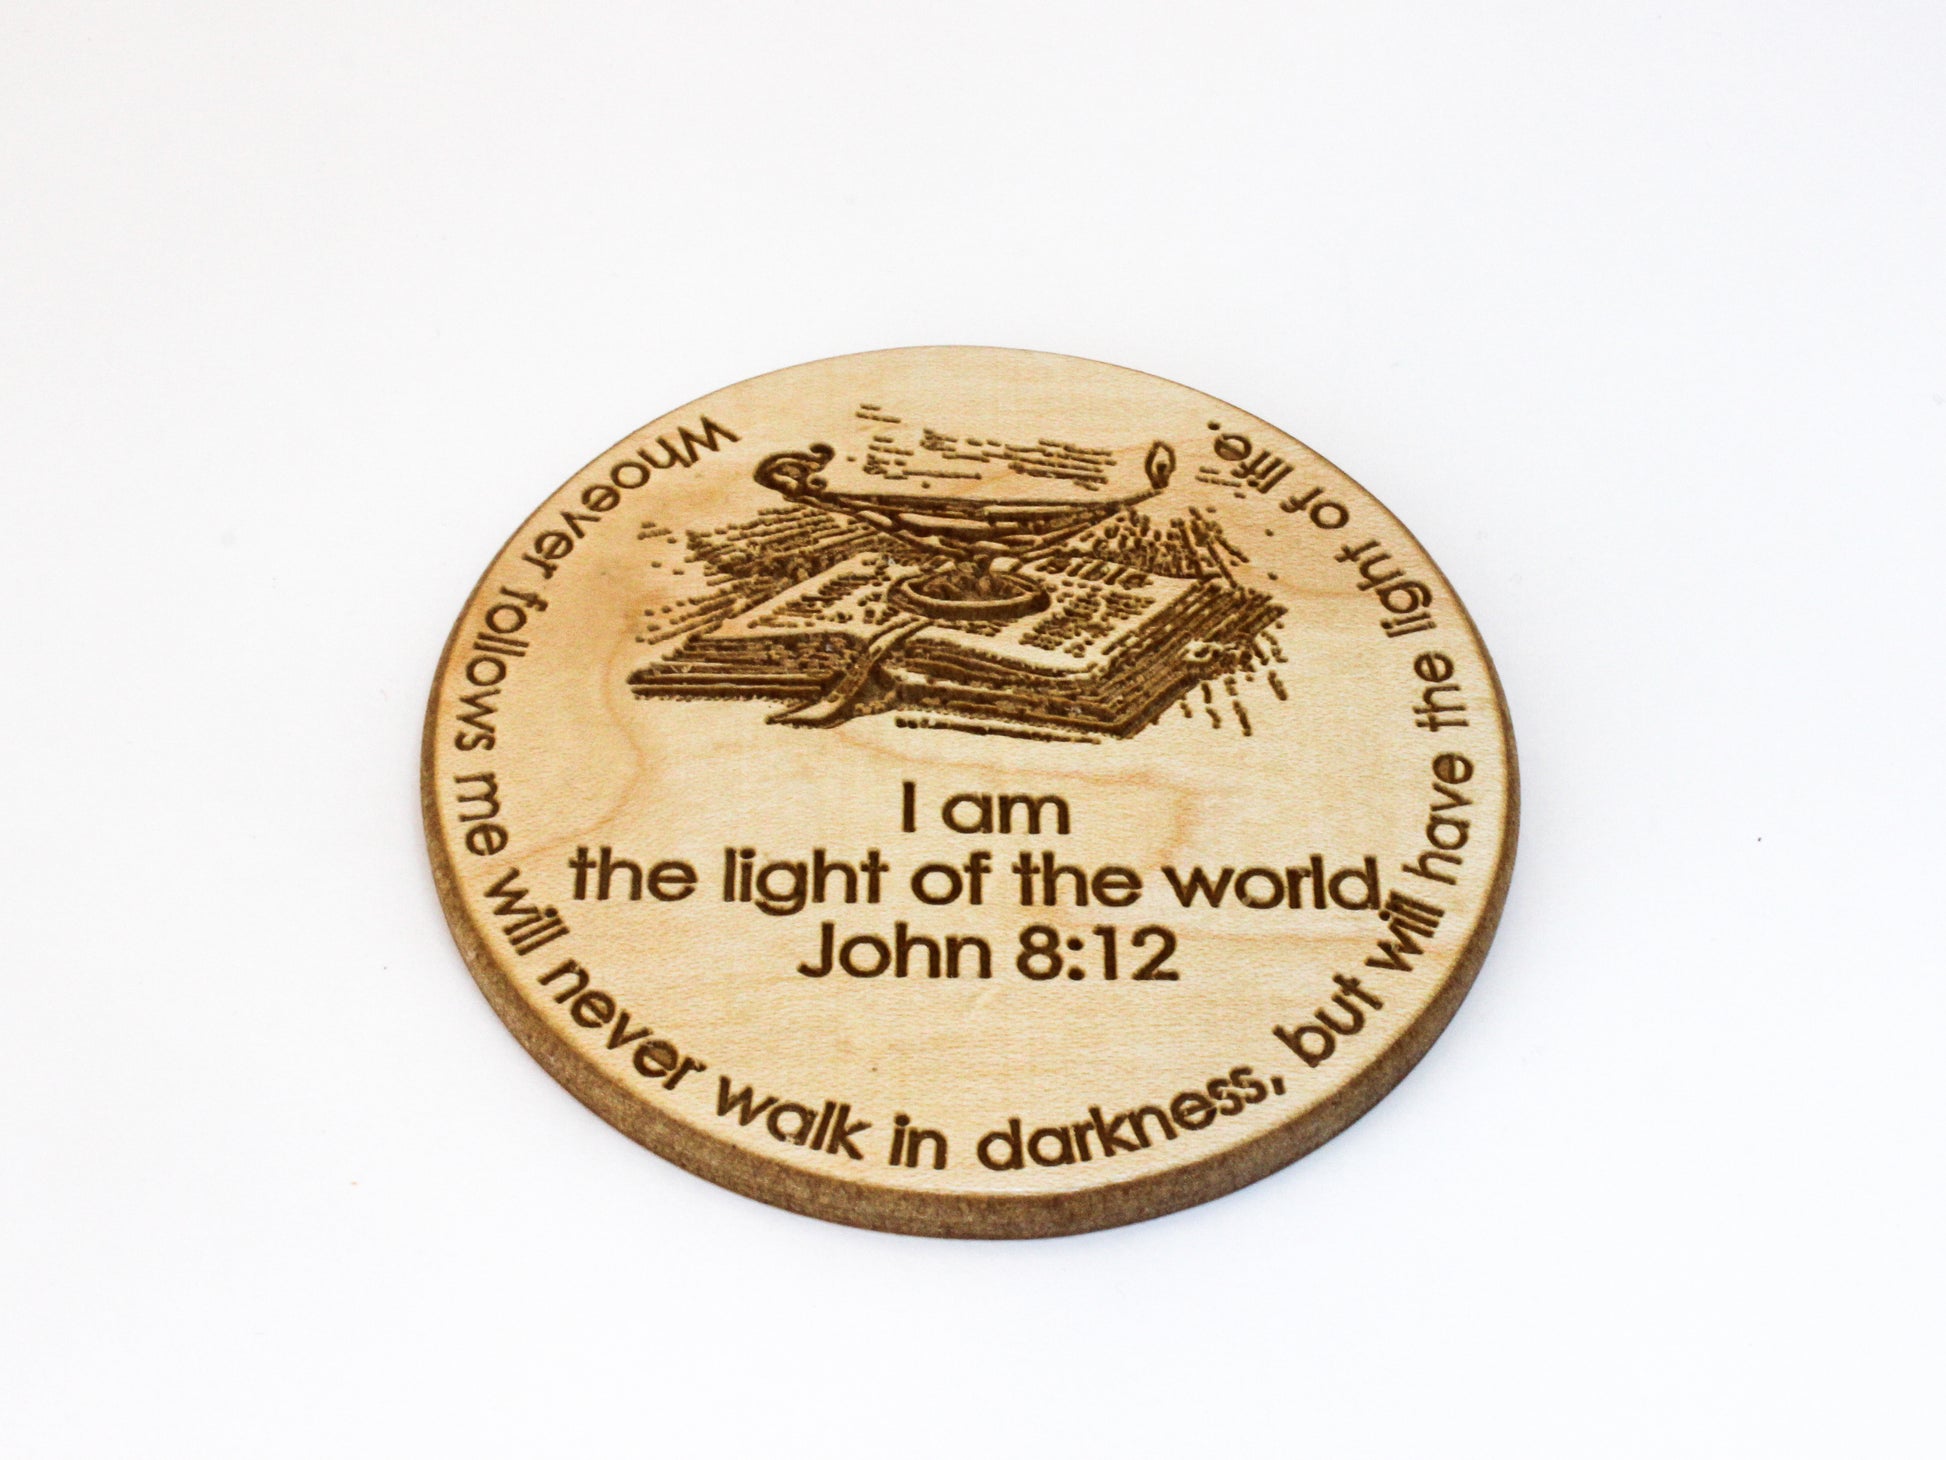 Wood coaster featuring an image of a lamp and an open Bible, as well as the text of John 8:12: "I am the light of the world. Whoever follows me will never walk in darkness, but will have the light of life." 